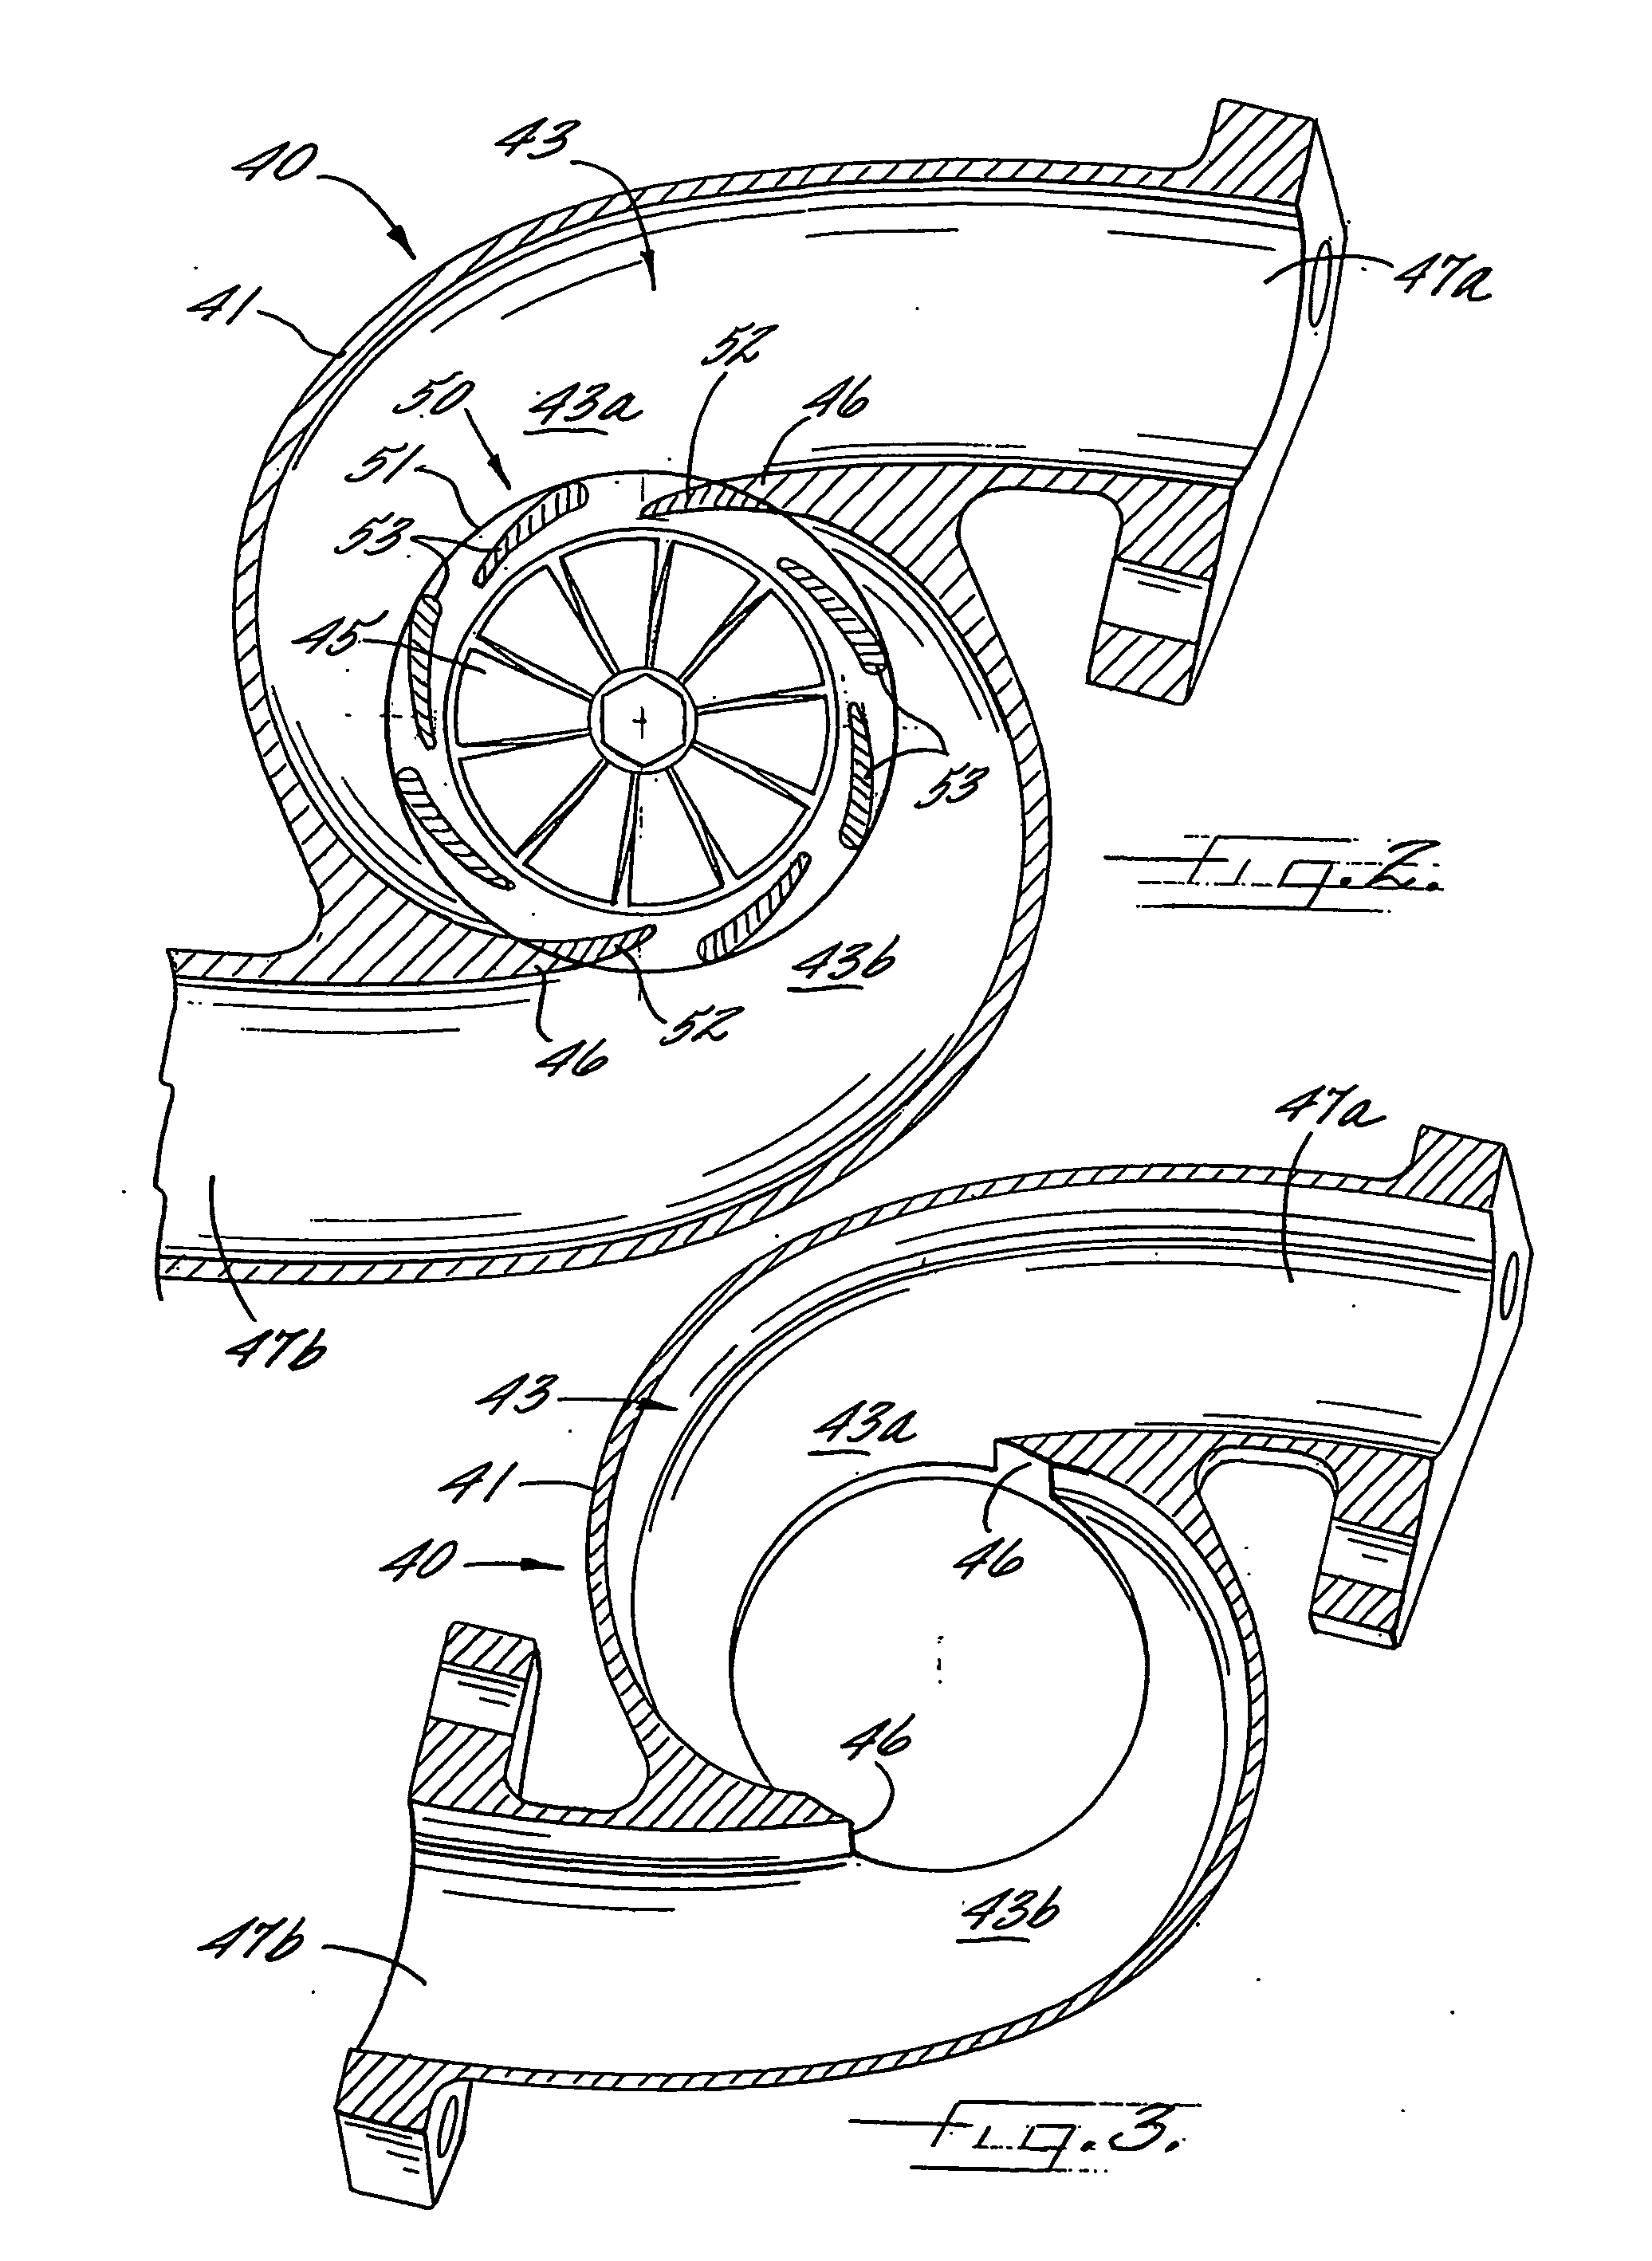 Sector-Divided Turbine Assembly With Axial Piston Variable-Geometry Mechanism